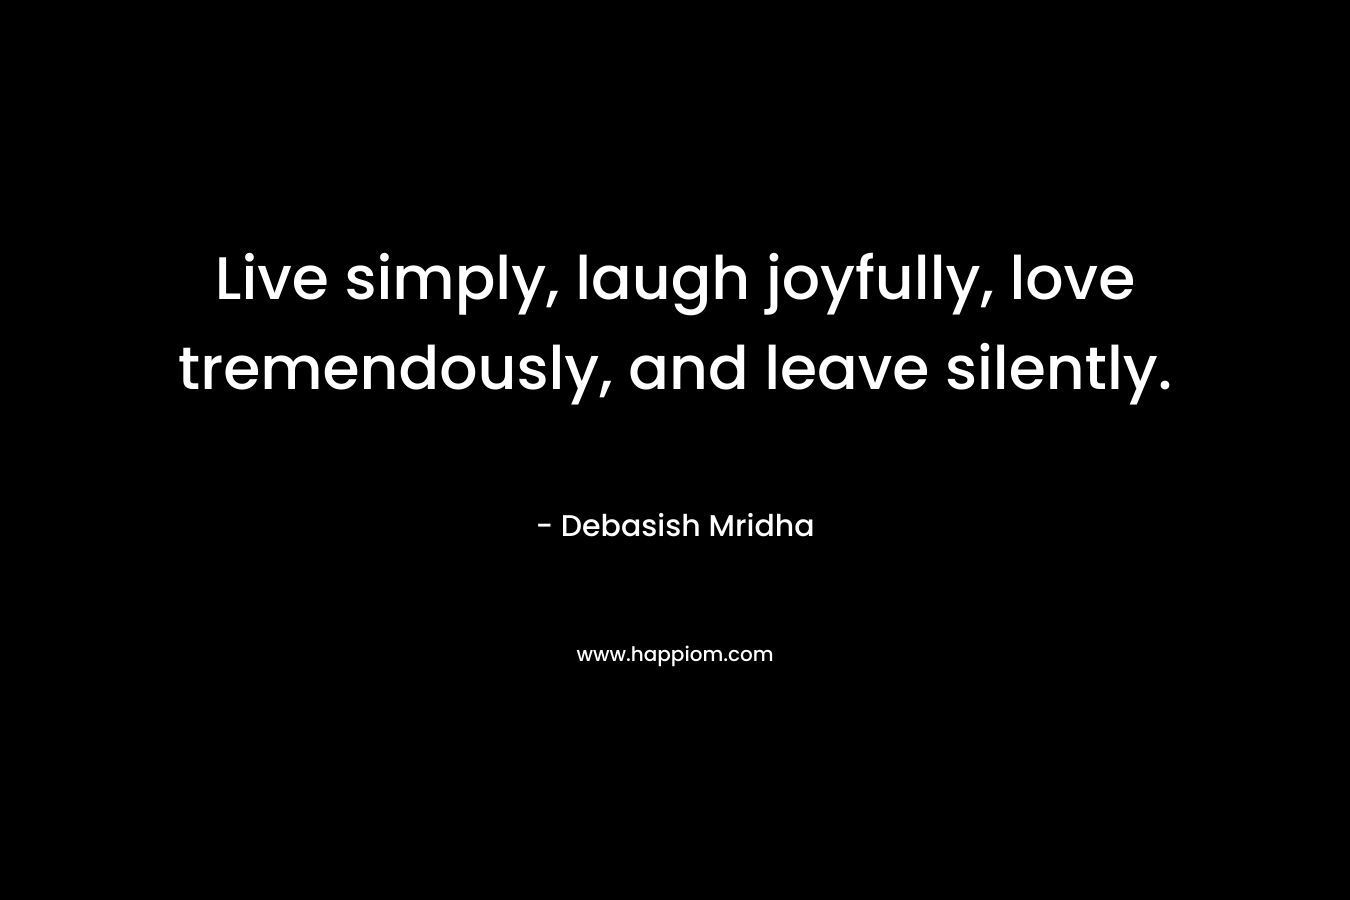 Live simply, laugh joyfully, love tremendously, and leave silently.